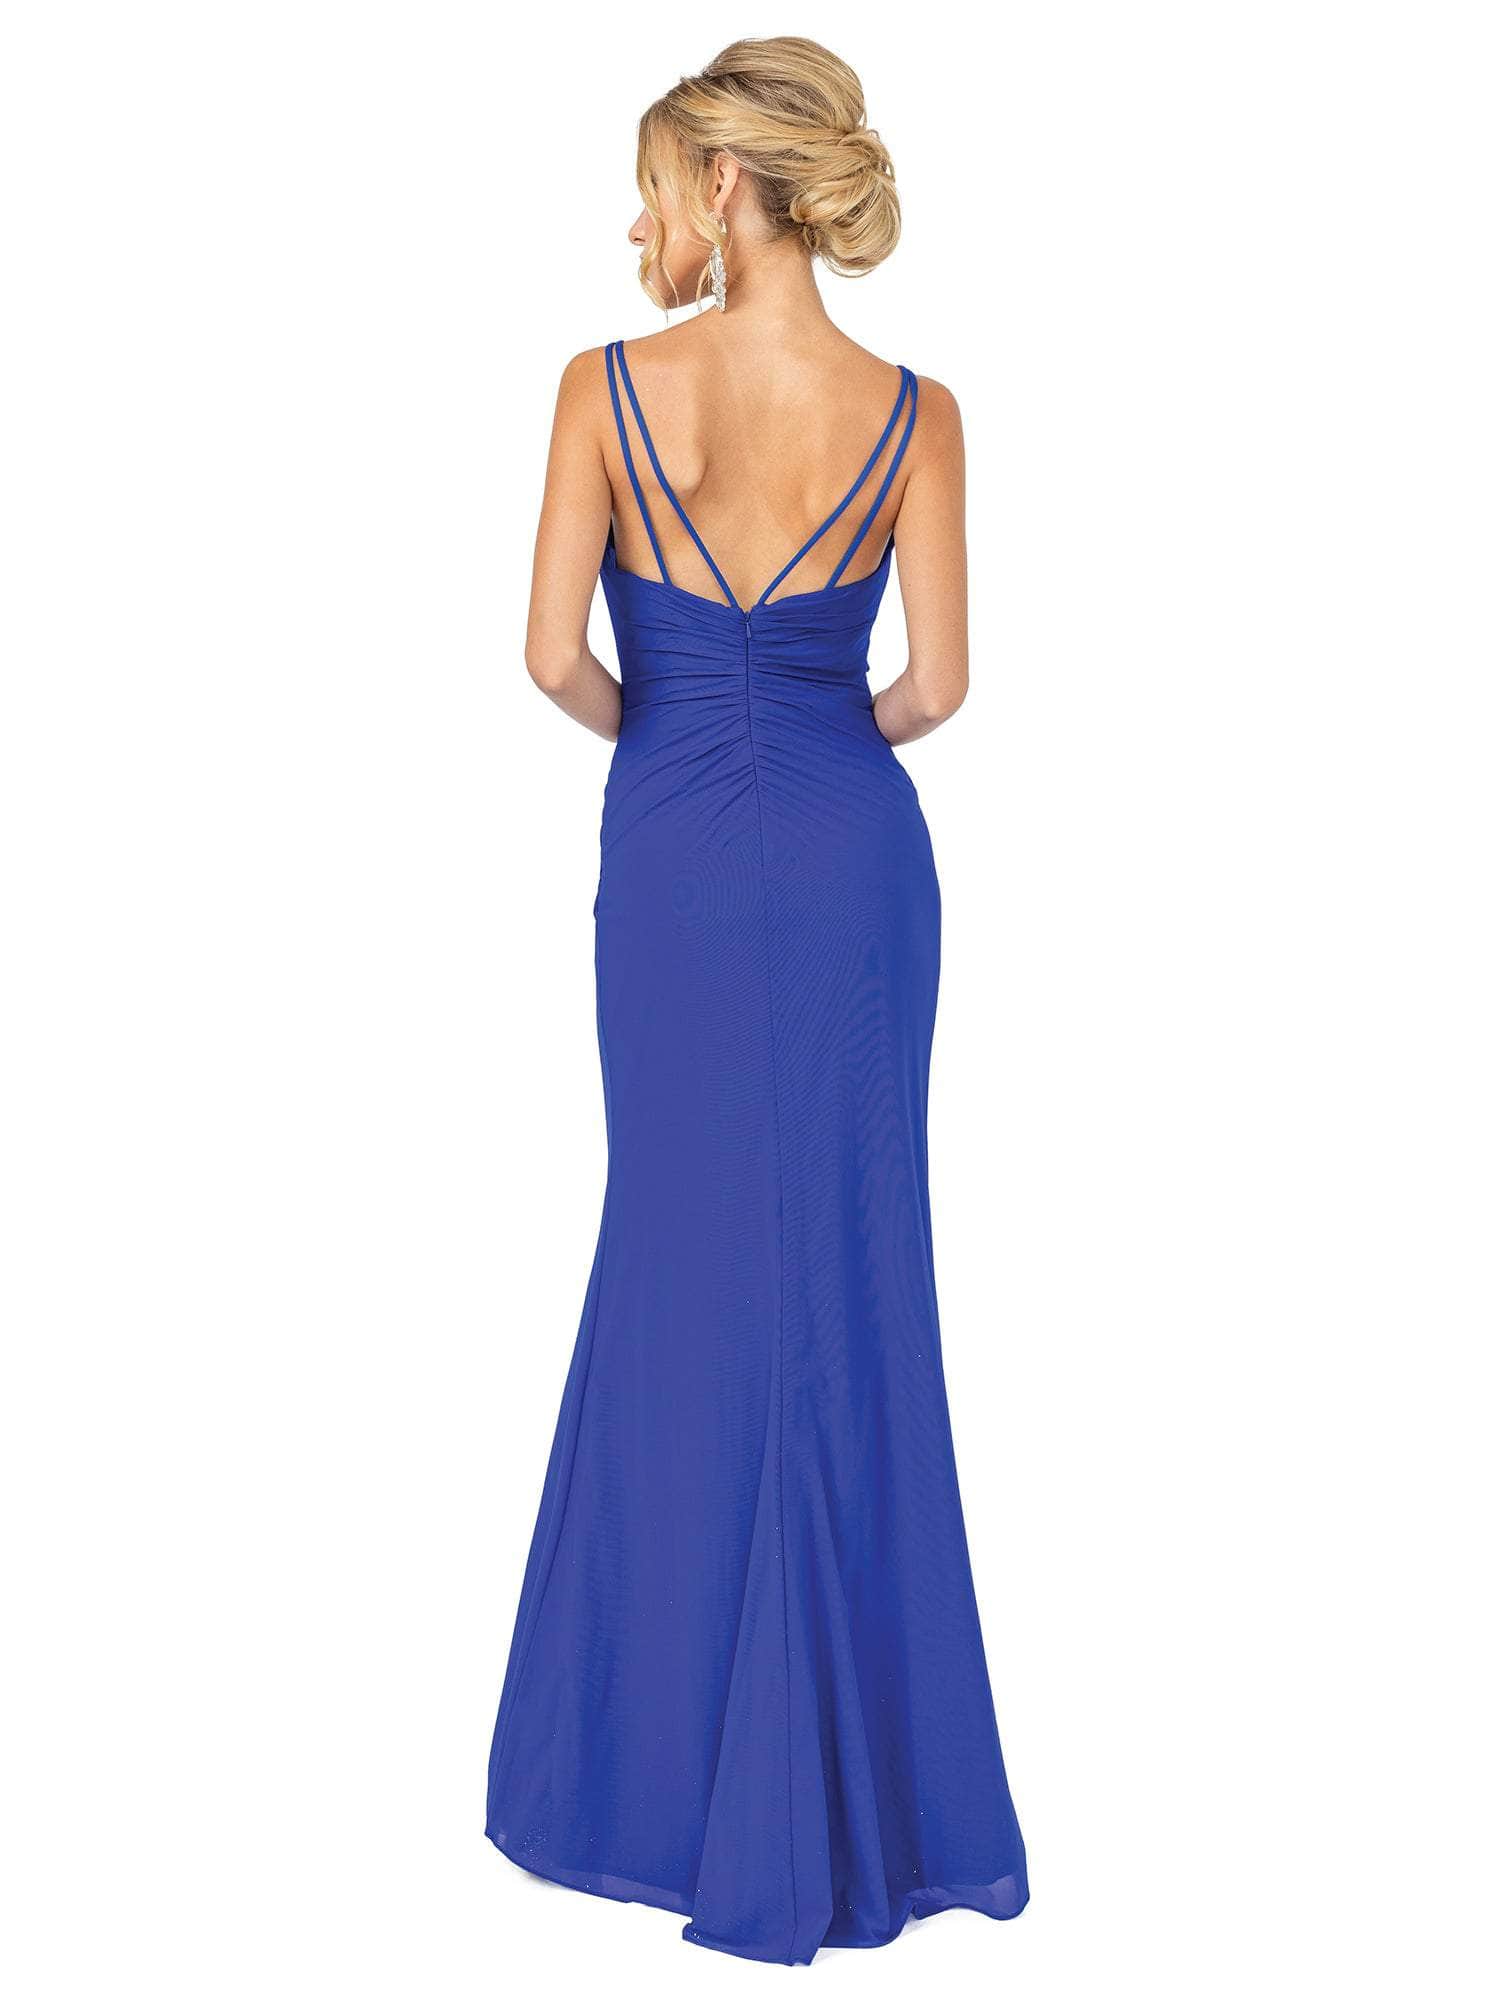 Dancing Queen - 2905 V Neck Double Strap High Slit Fitted Prom Gown ...